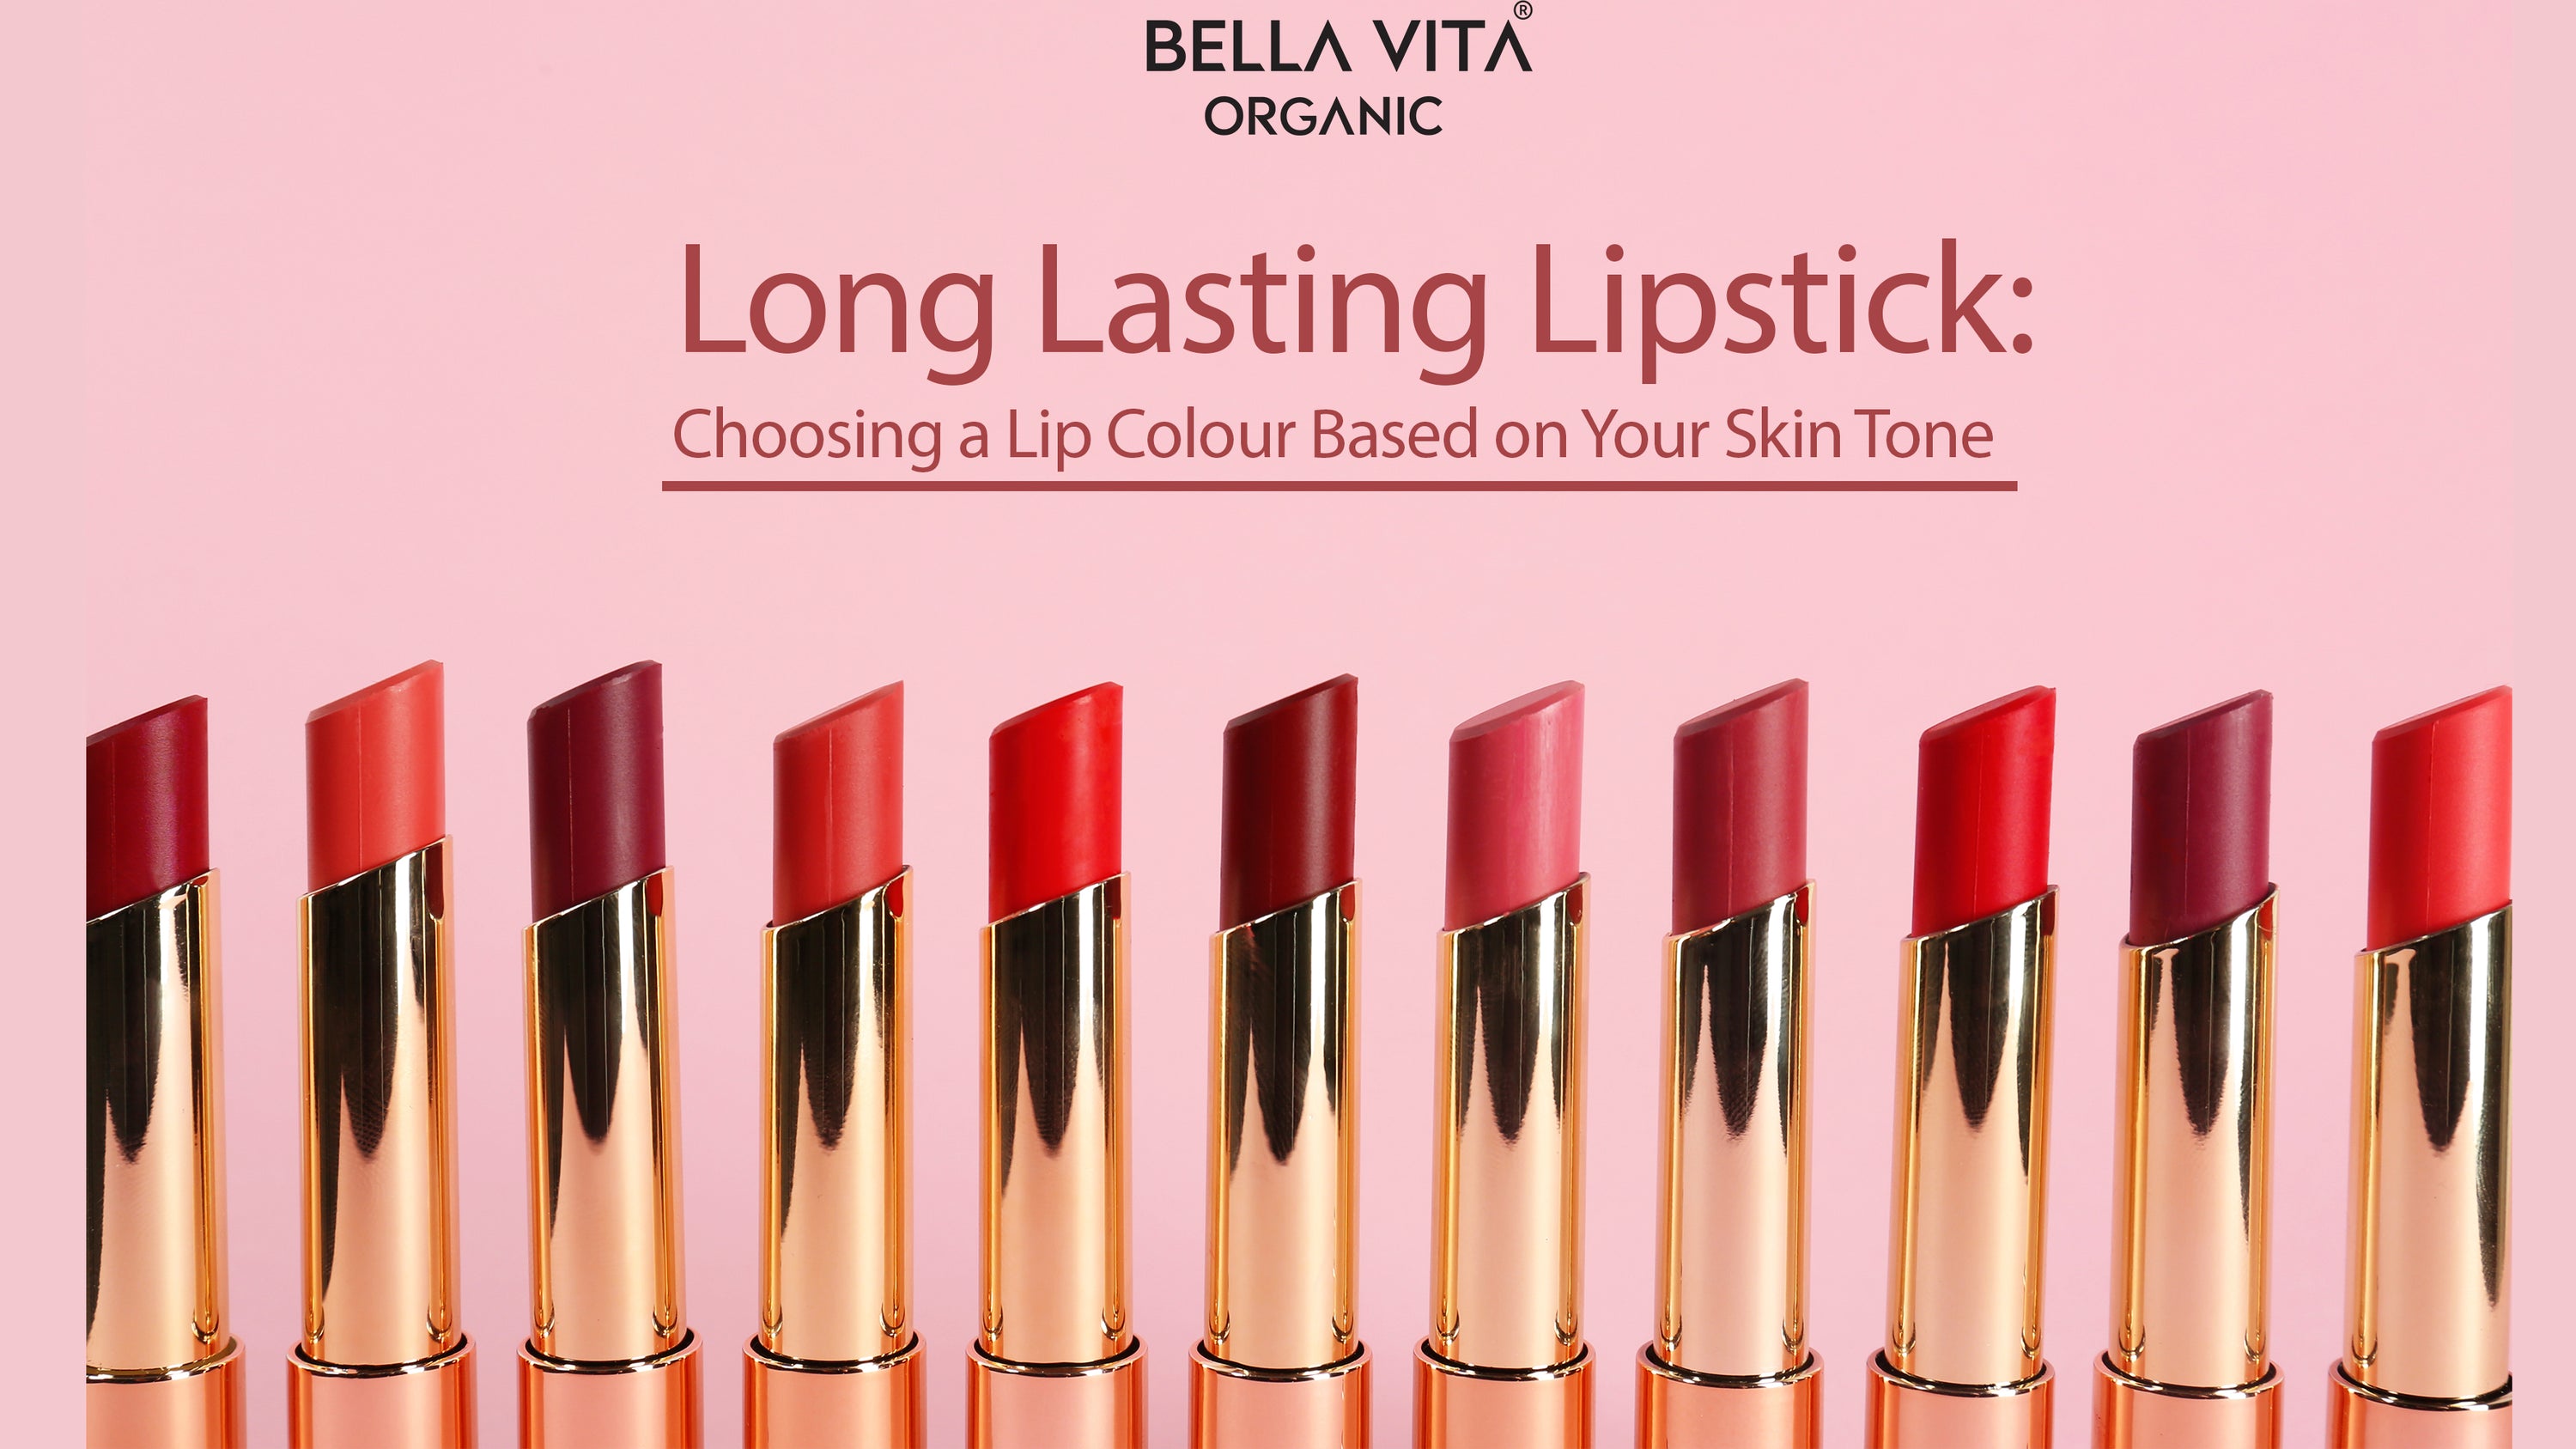 Long Lasting Lipstick:Choosing a Lip Colour Based on Your Skin Tone